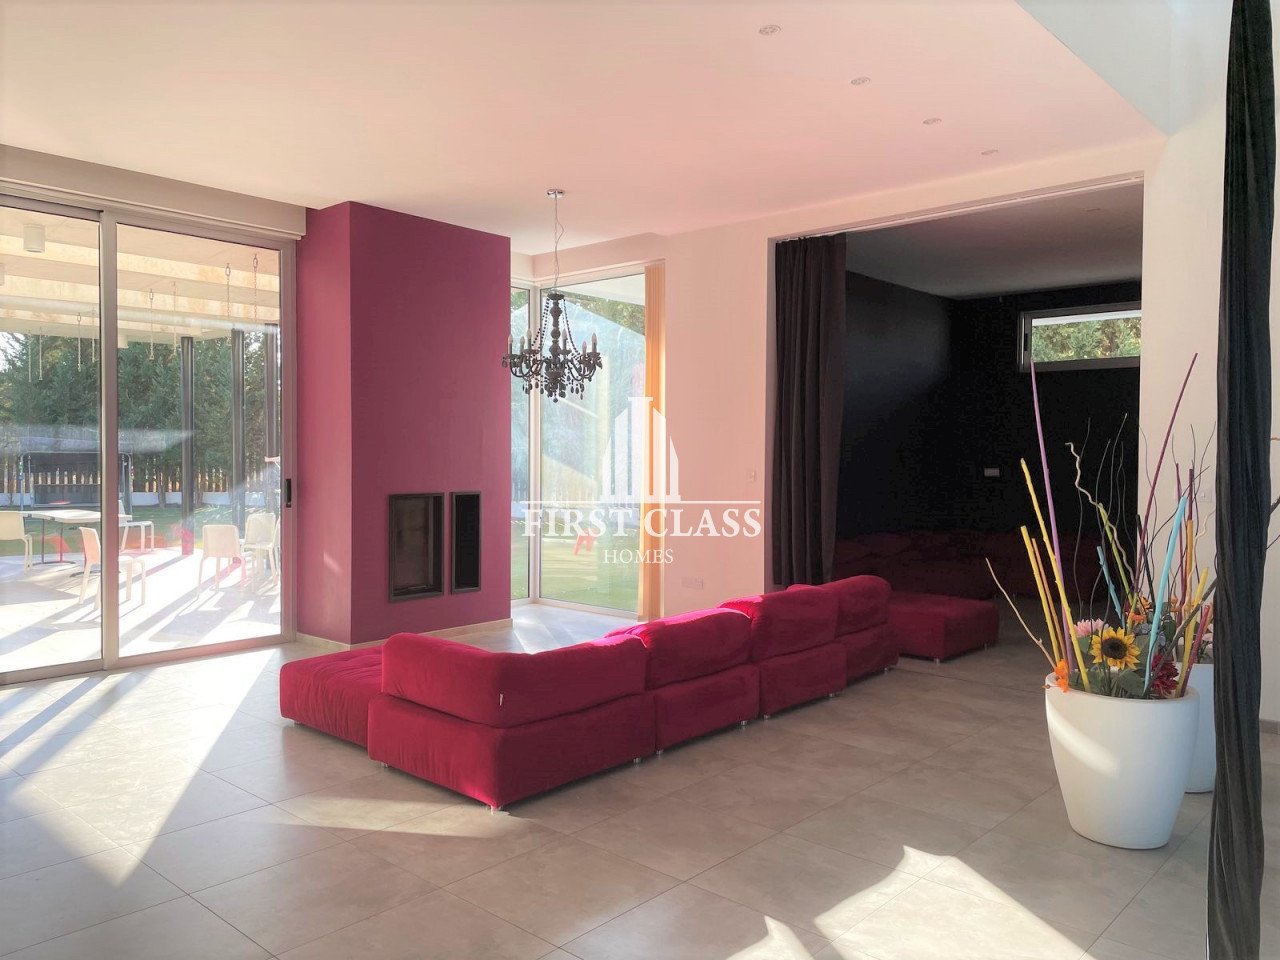 Property for Rent: House (Detached) in Dali, Nicosia for Rent | Key Realtor Cyprus